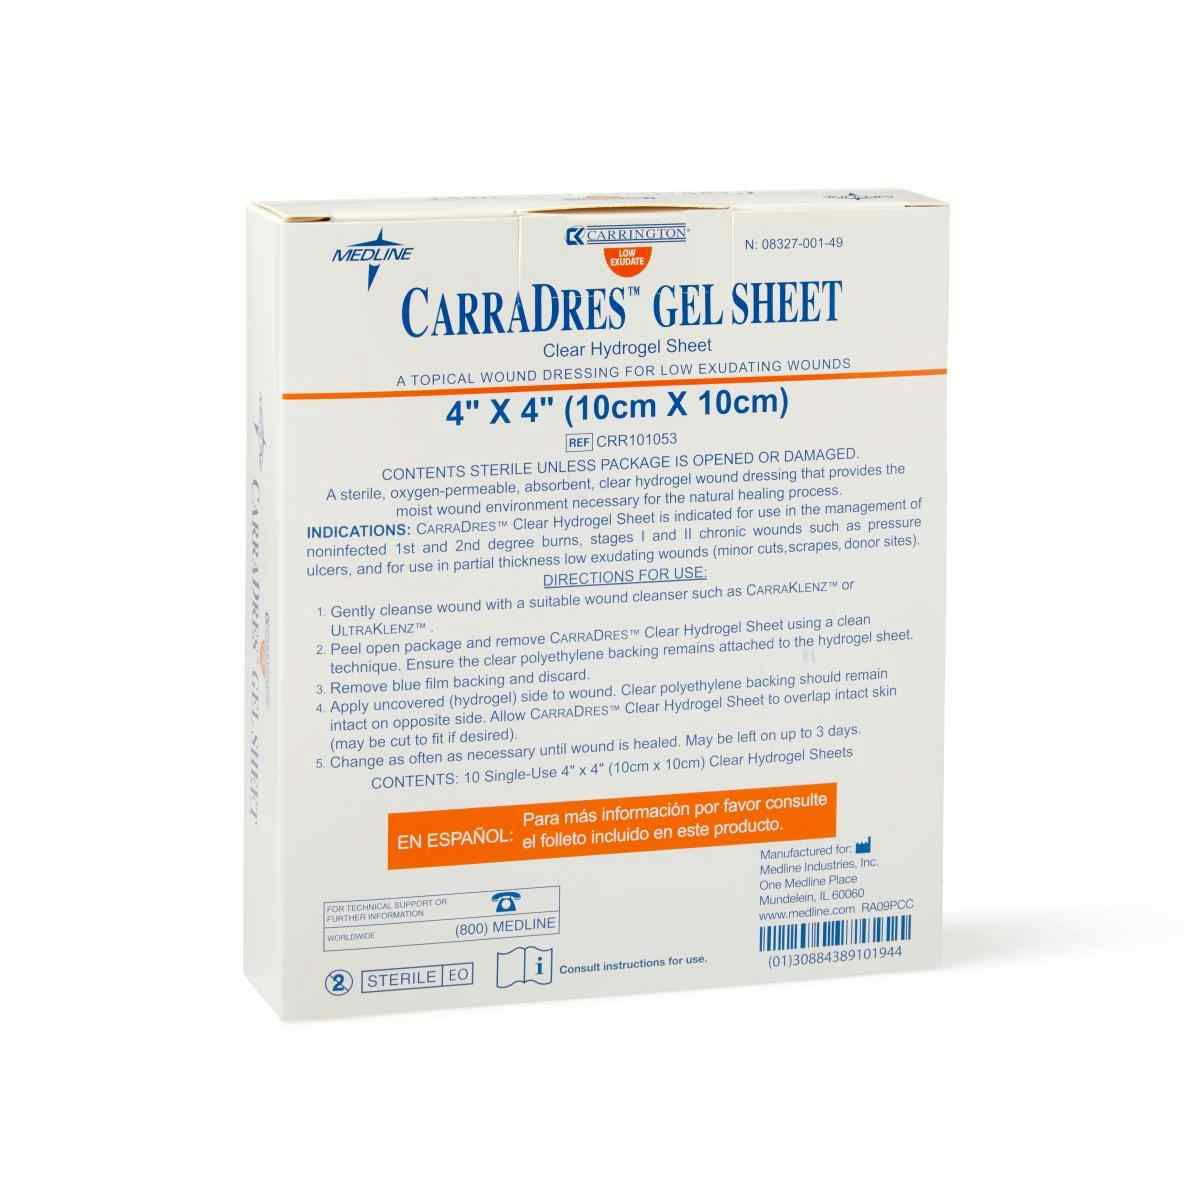 CarraDres Clear Hydrogel Sheets, 4" X 4"